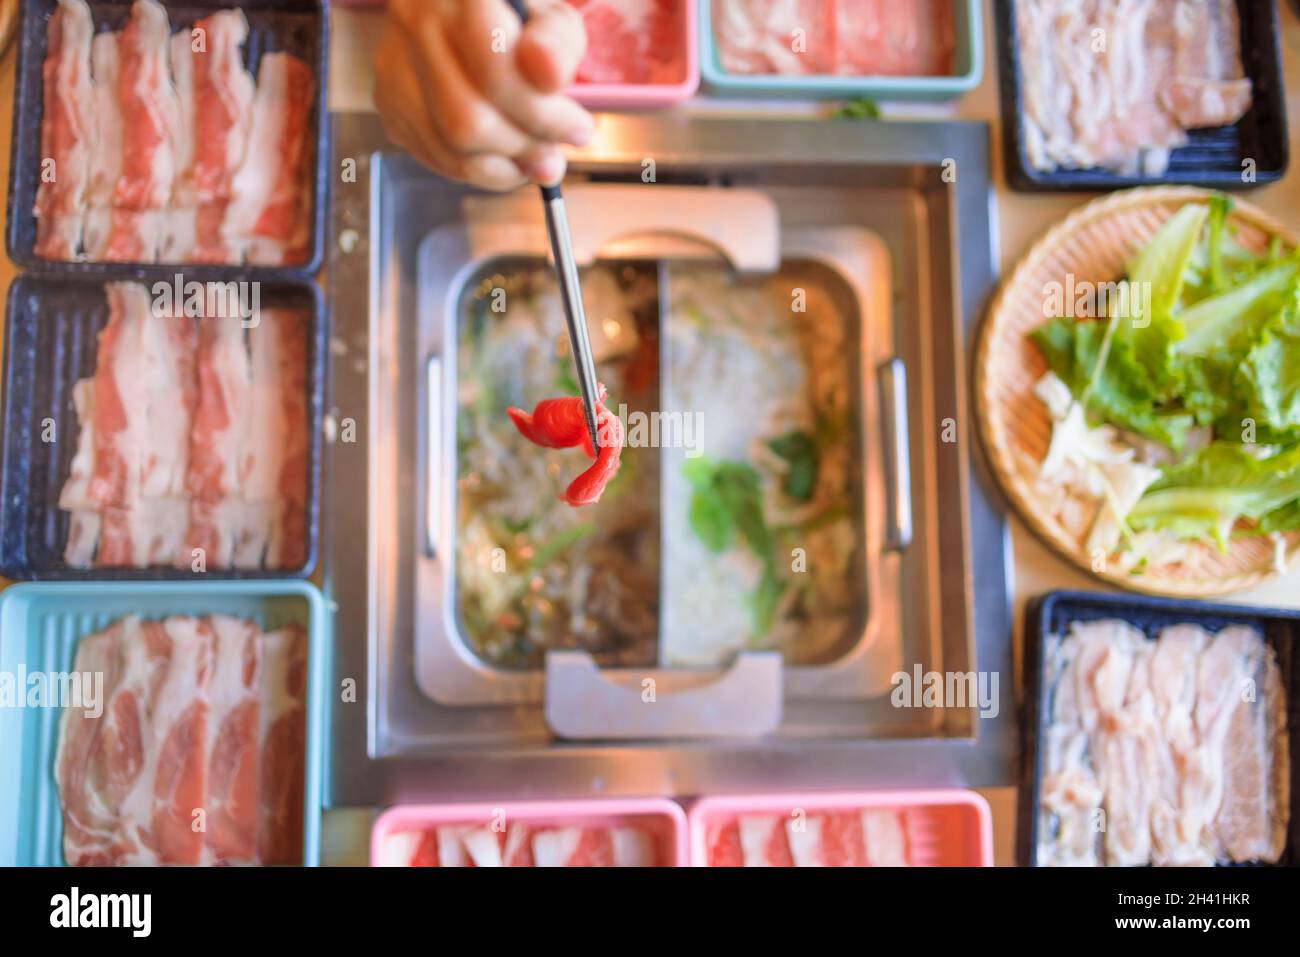 hot pot meal. Hands taking food with chopsticks. Stock Photo